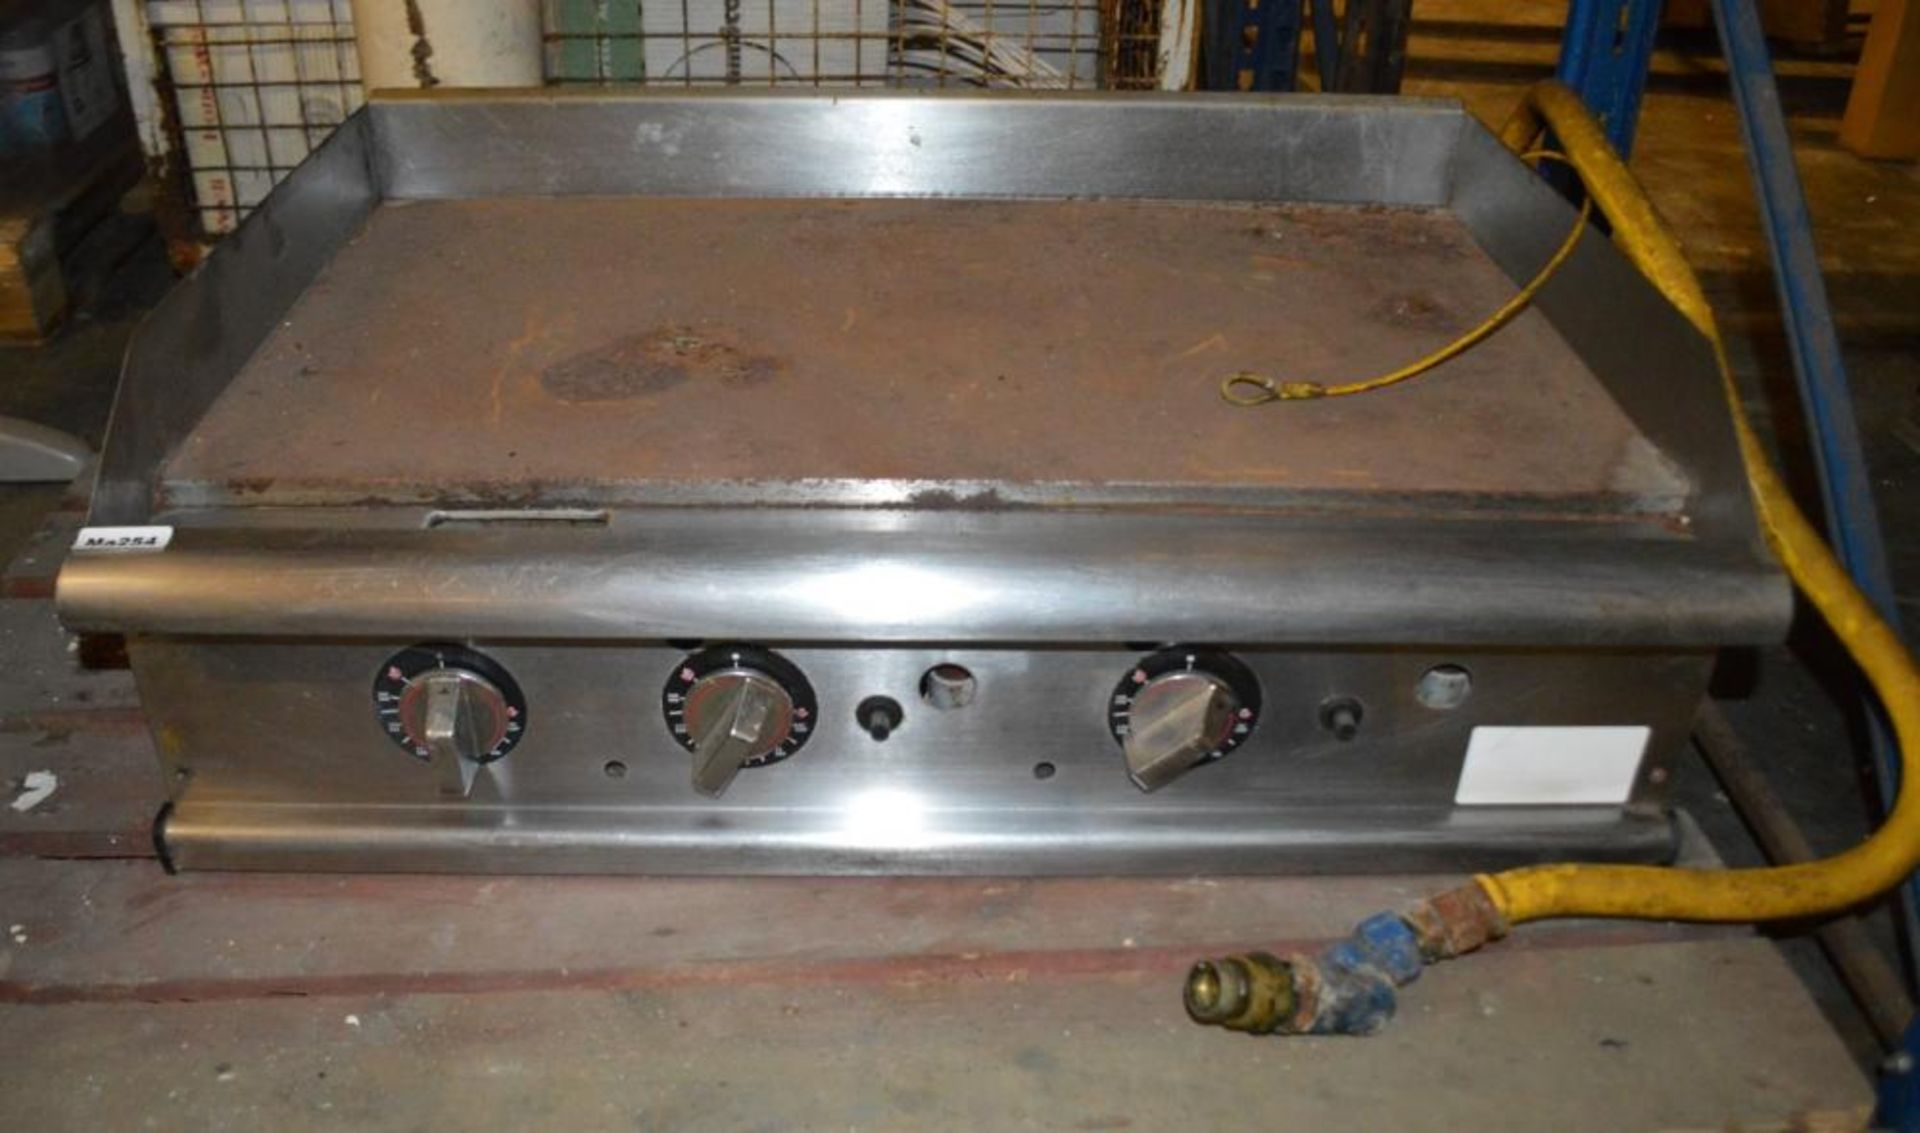 1 x Stainless Steel Comercial Gas Griddle - Dimensions: W92 x D64 x H30cm - Low Start, No Reserve